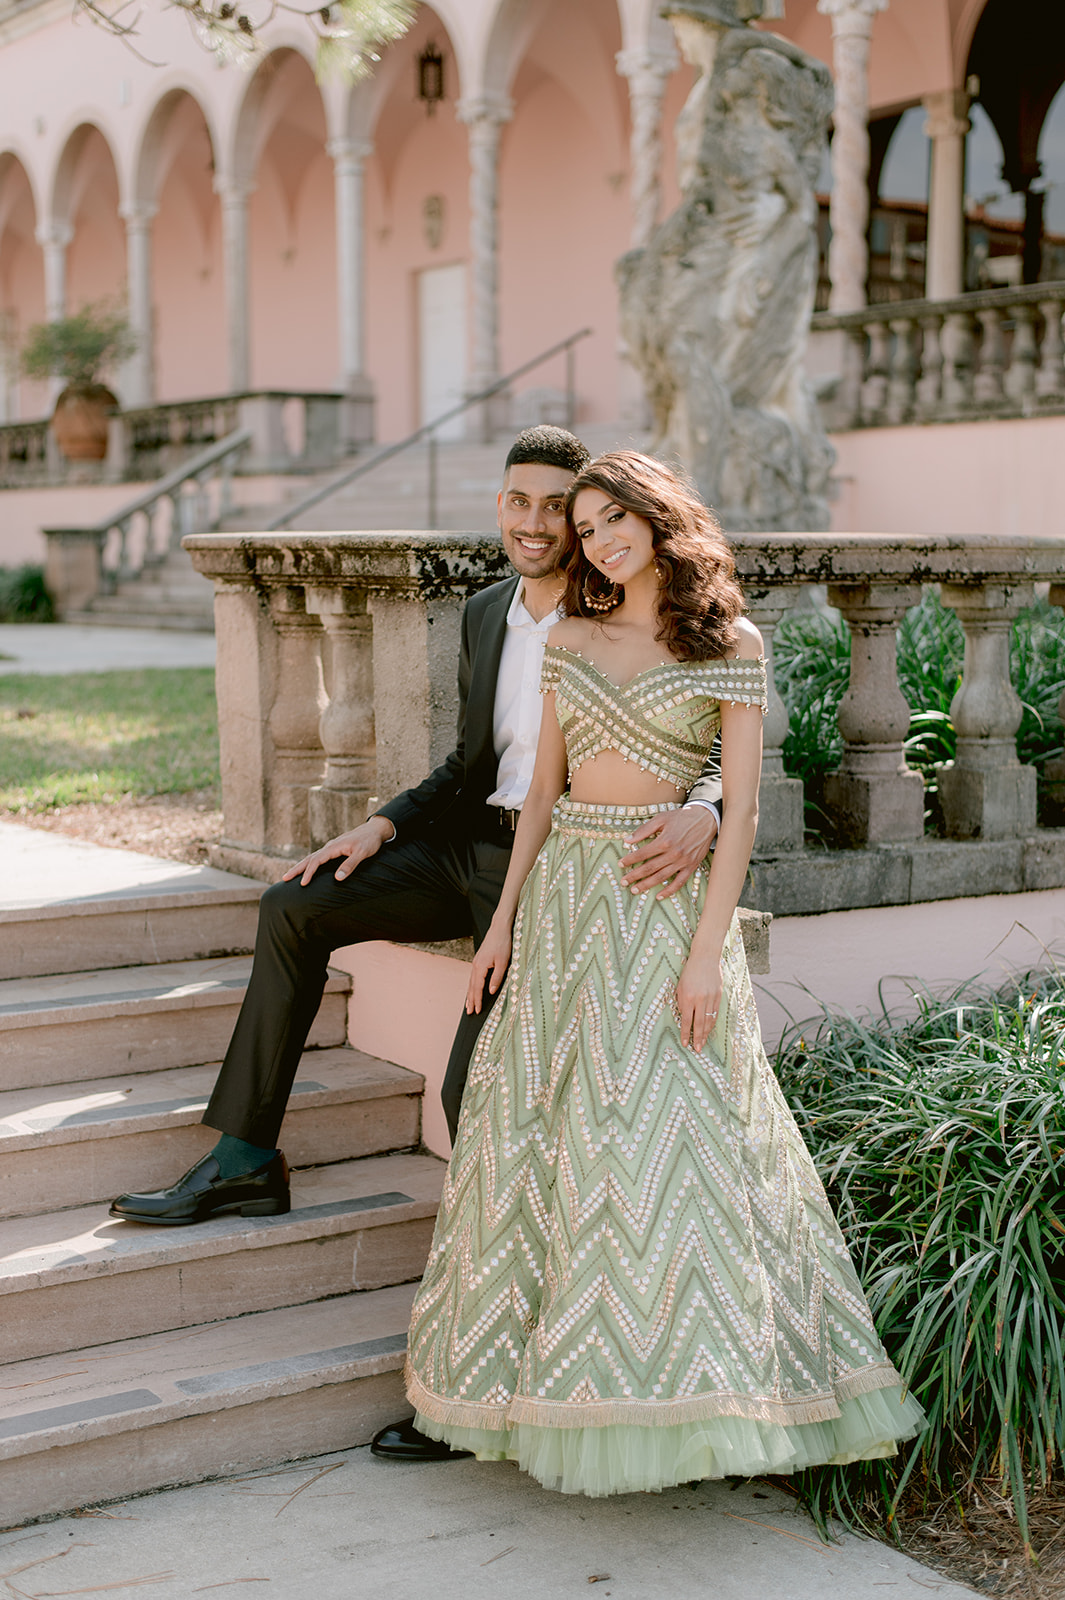 "Stunning Ringling Museum engagement session with the Ca' d'Zan as a beautiful setting"
